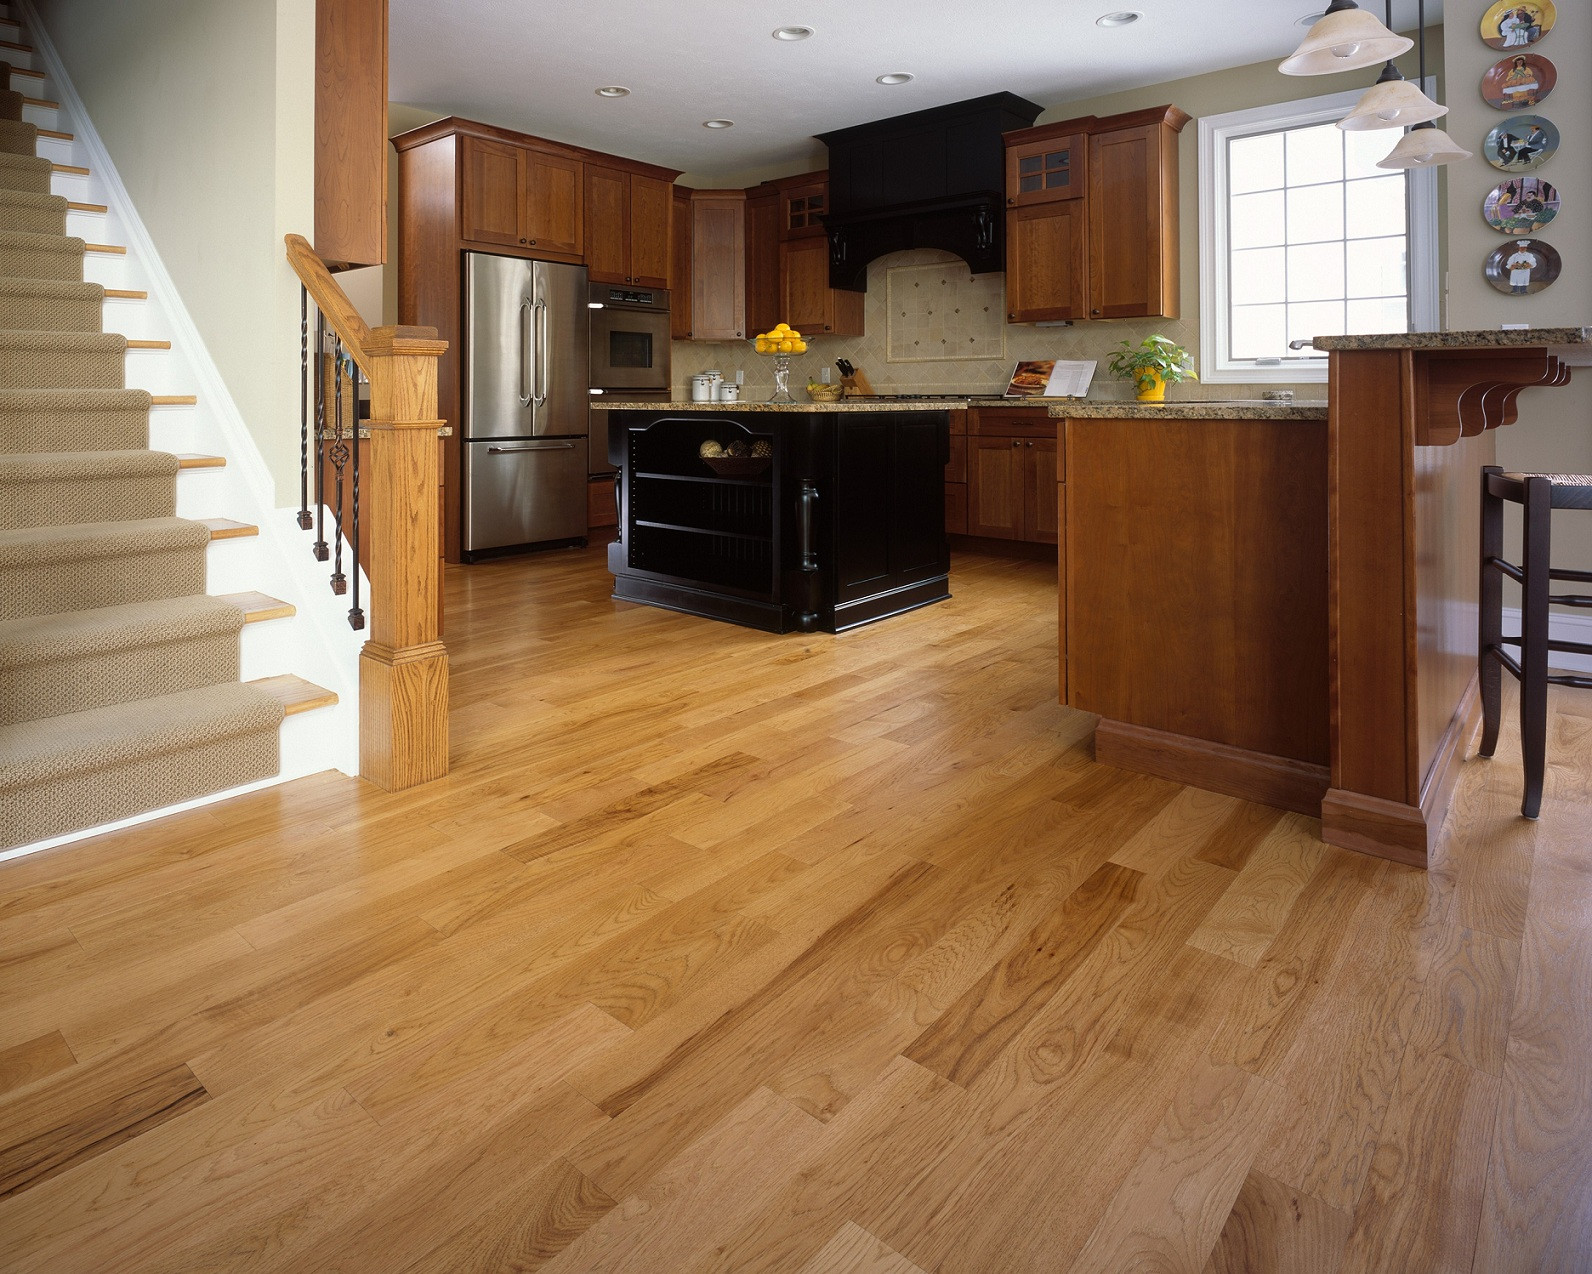 30 Trendy Hardwood Floors with Dark Cabinets 2024 free download hardwood floors with dark cabinets of white kitchen cabinets with brazilian cherry floors new kitchen for fabulous what color wood floor goes with mahogany furniture is best for dark cabinet